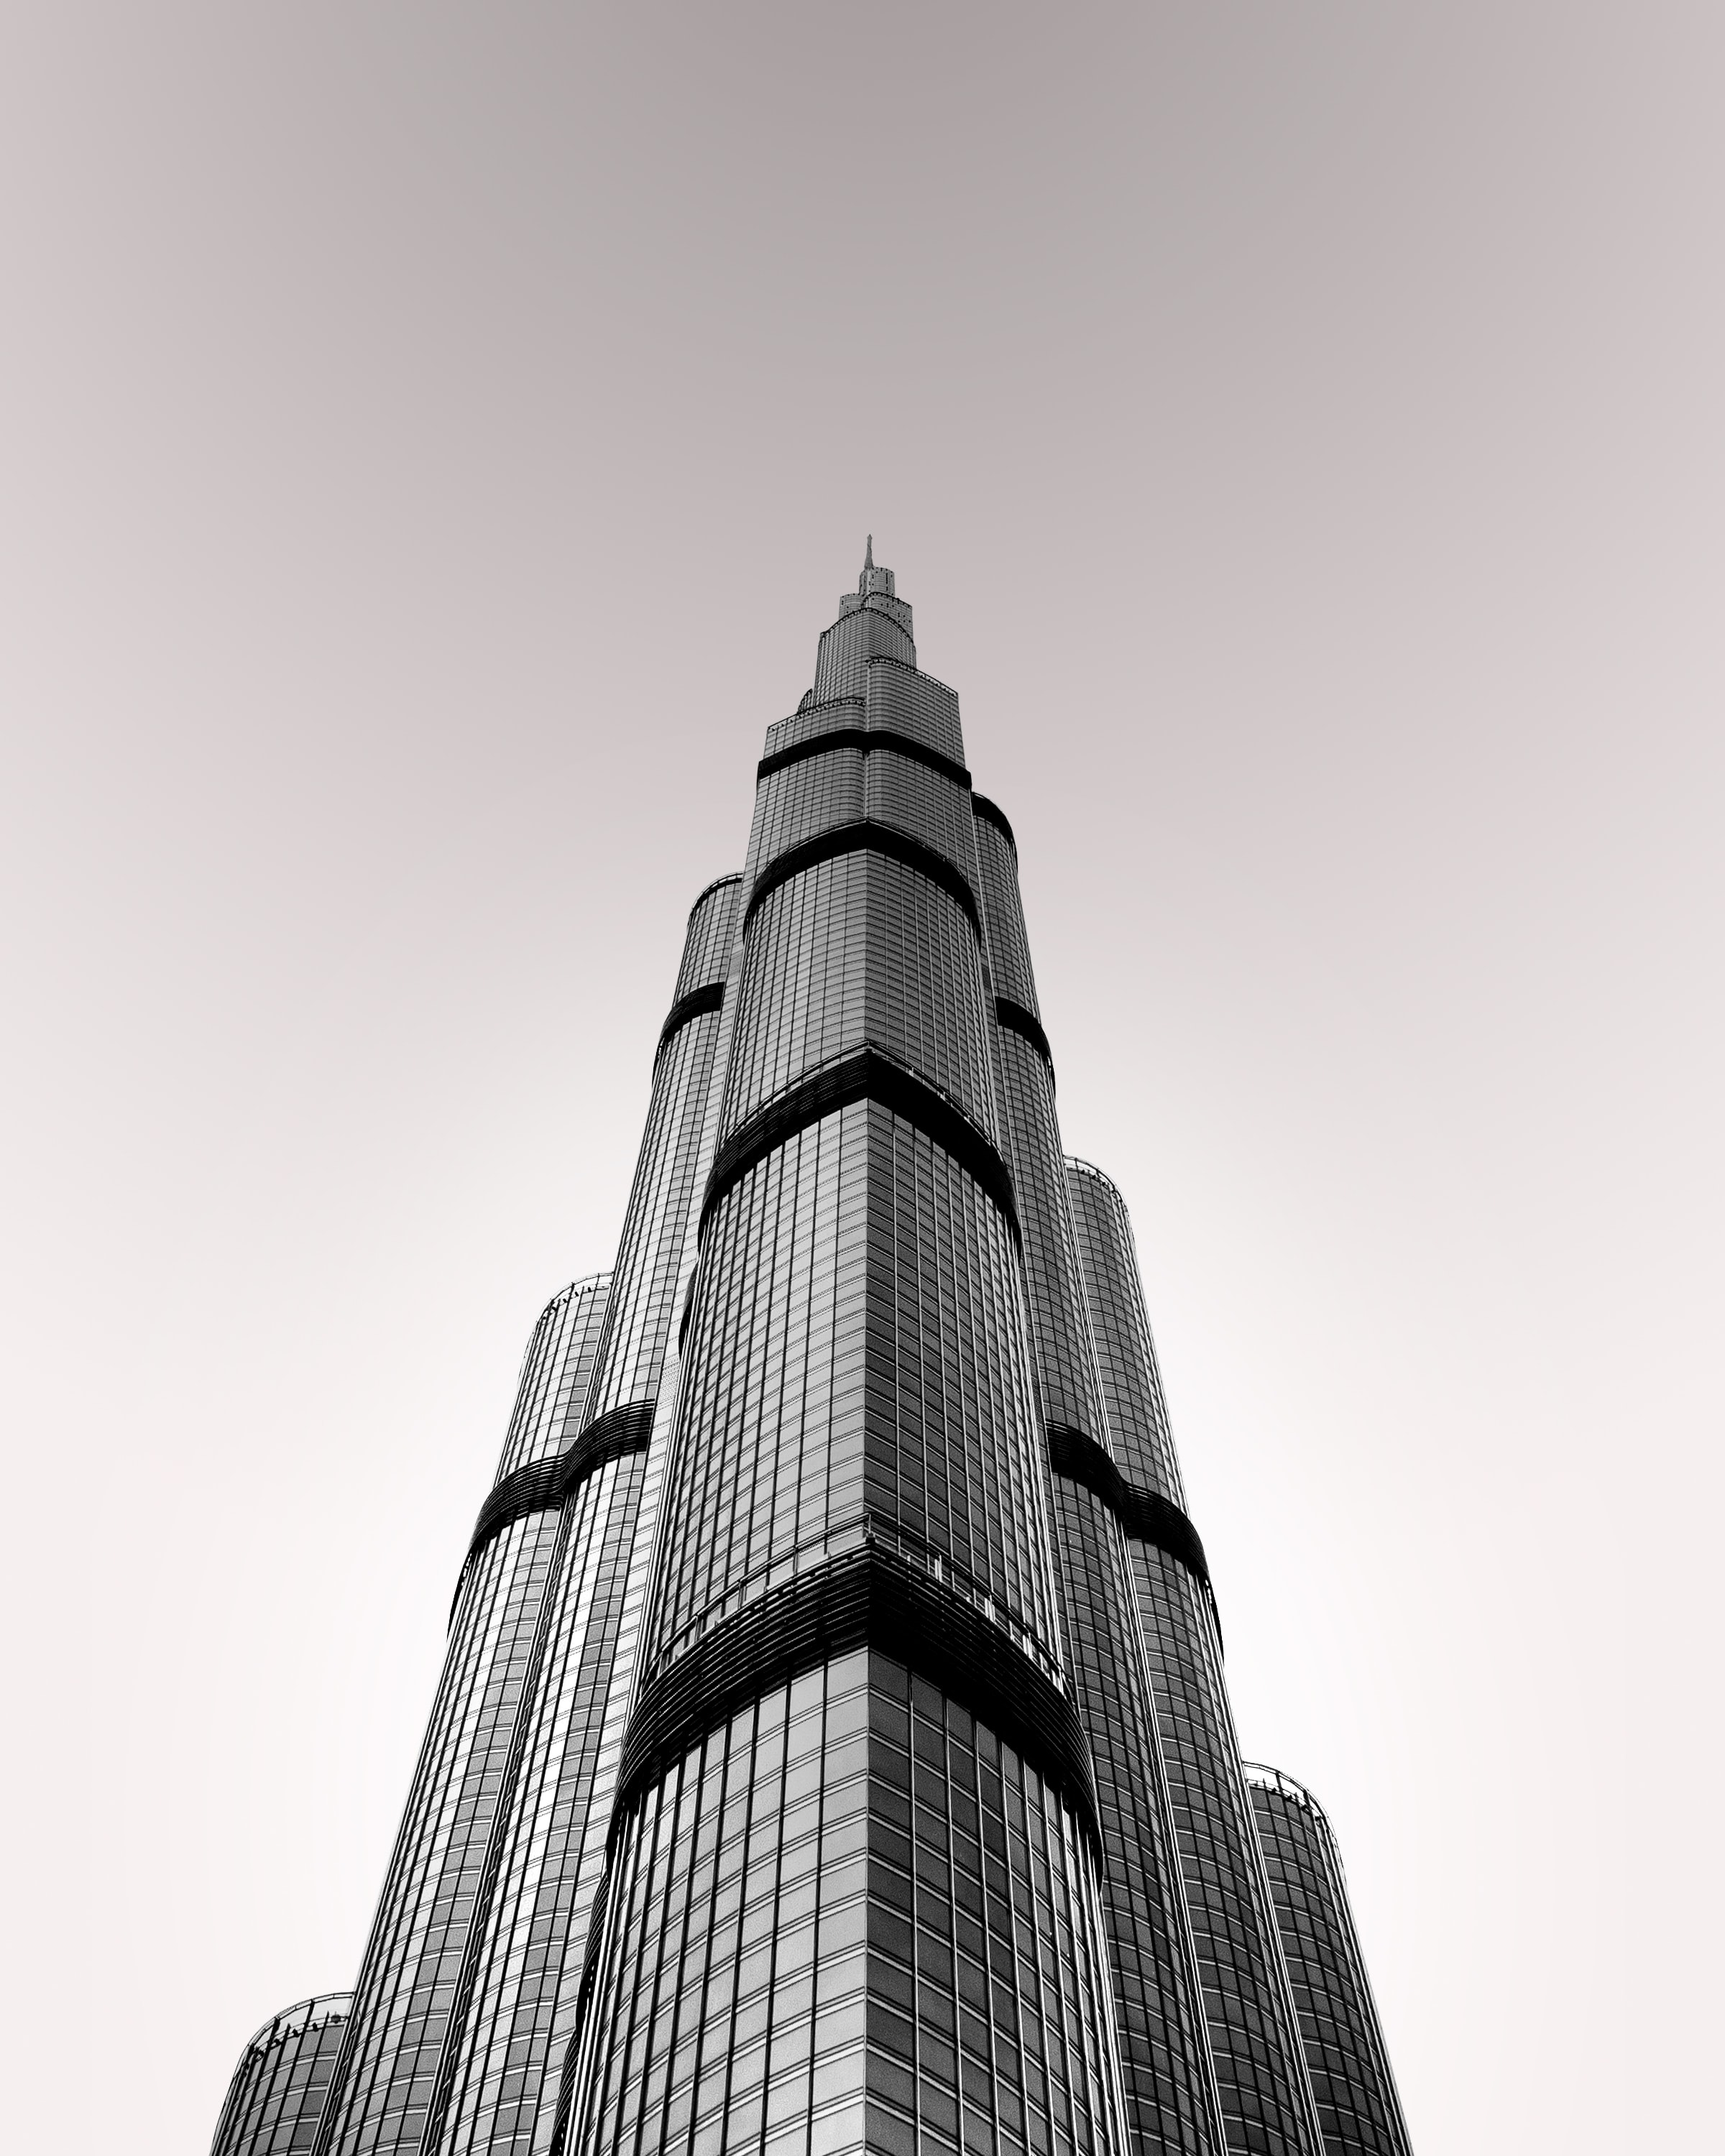 wallpapers architecture, tower, building, skyscraper, minimalism, grey